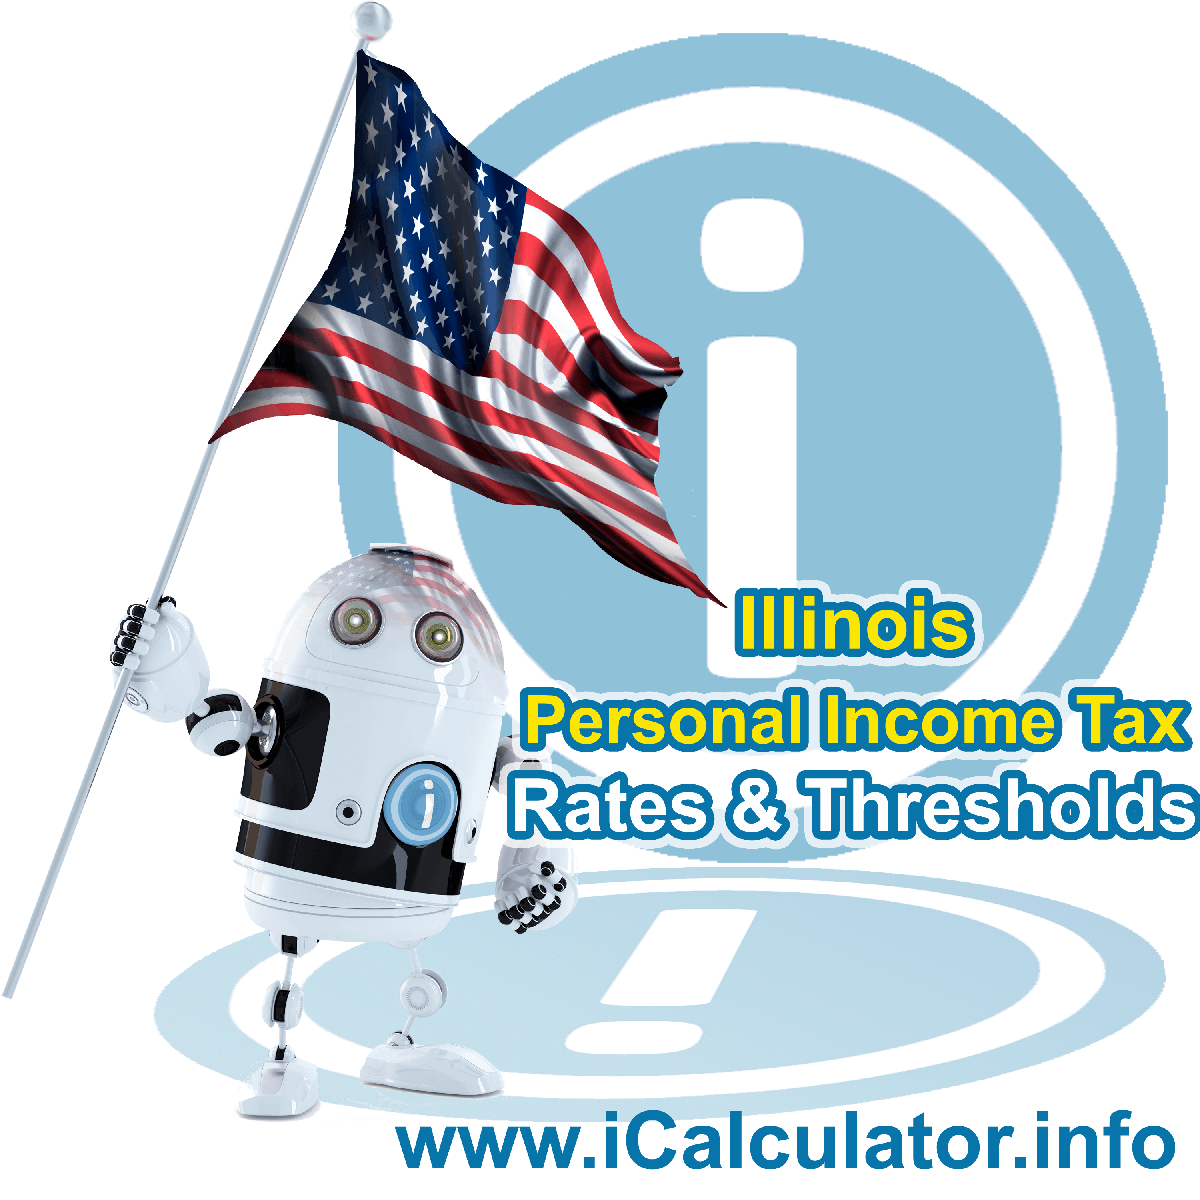 Illinois State Tax Tables 2023. This image displays details of the Illinois State Tax Tables for the 2023 tax return year which is provided in support of the 2023 US Tax Calculator